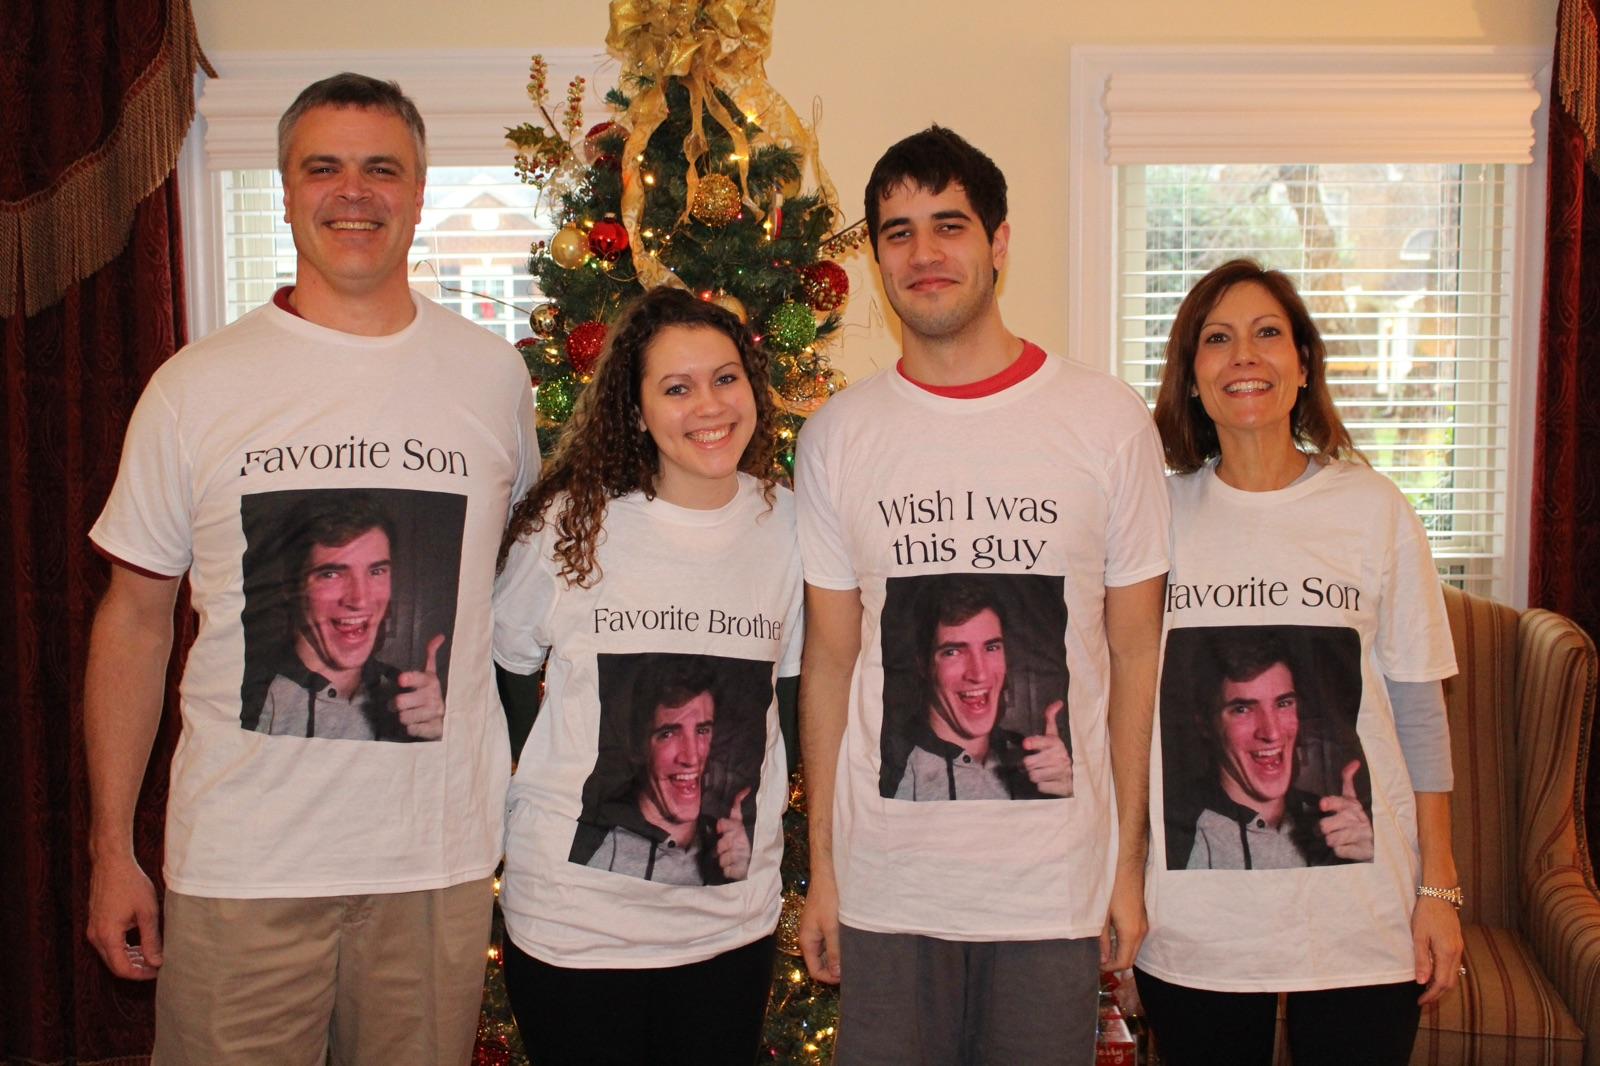 my face on a shirt - Favorite Son Wish I was this guy favorite Son Favorite Brothe